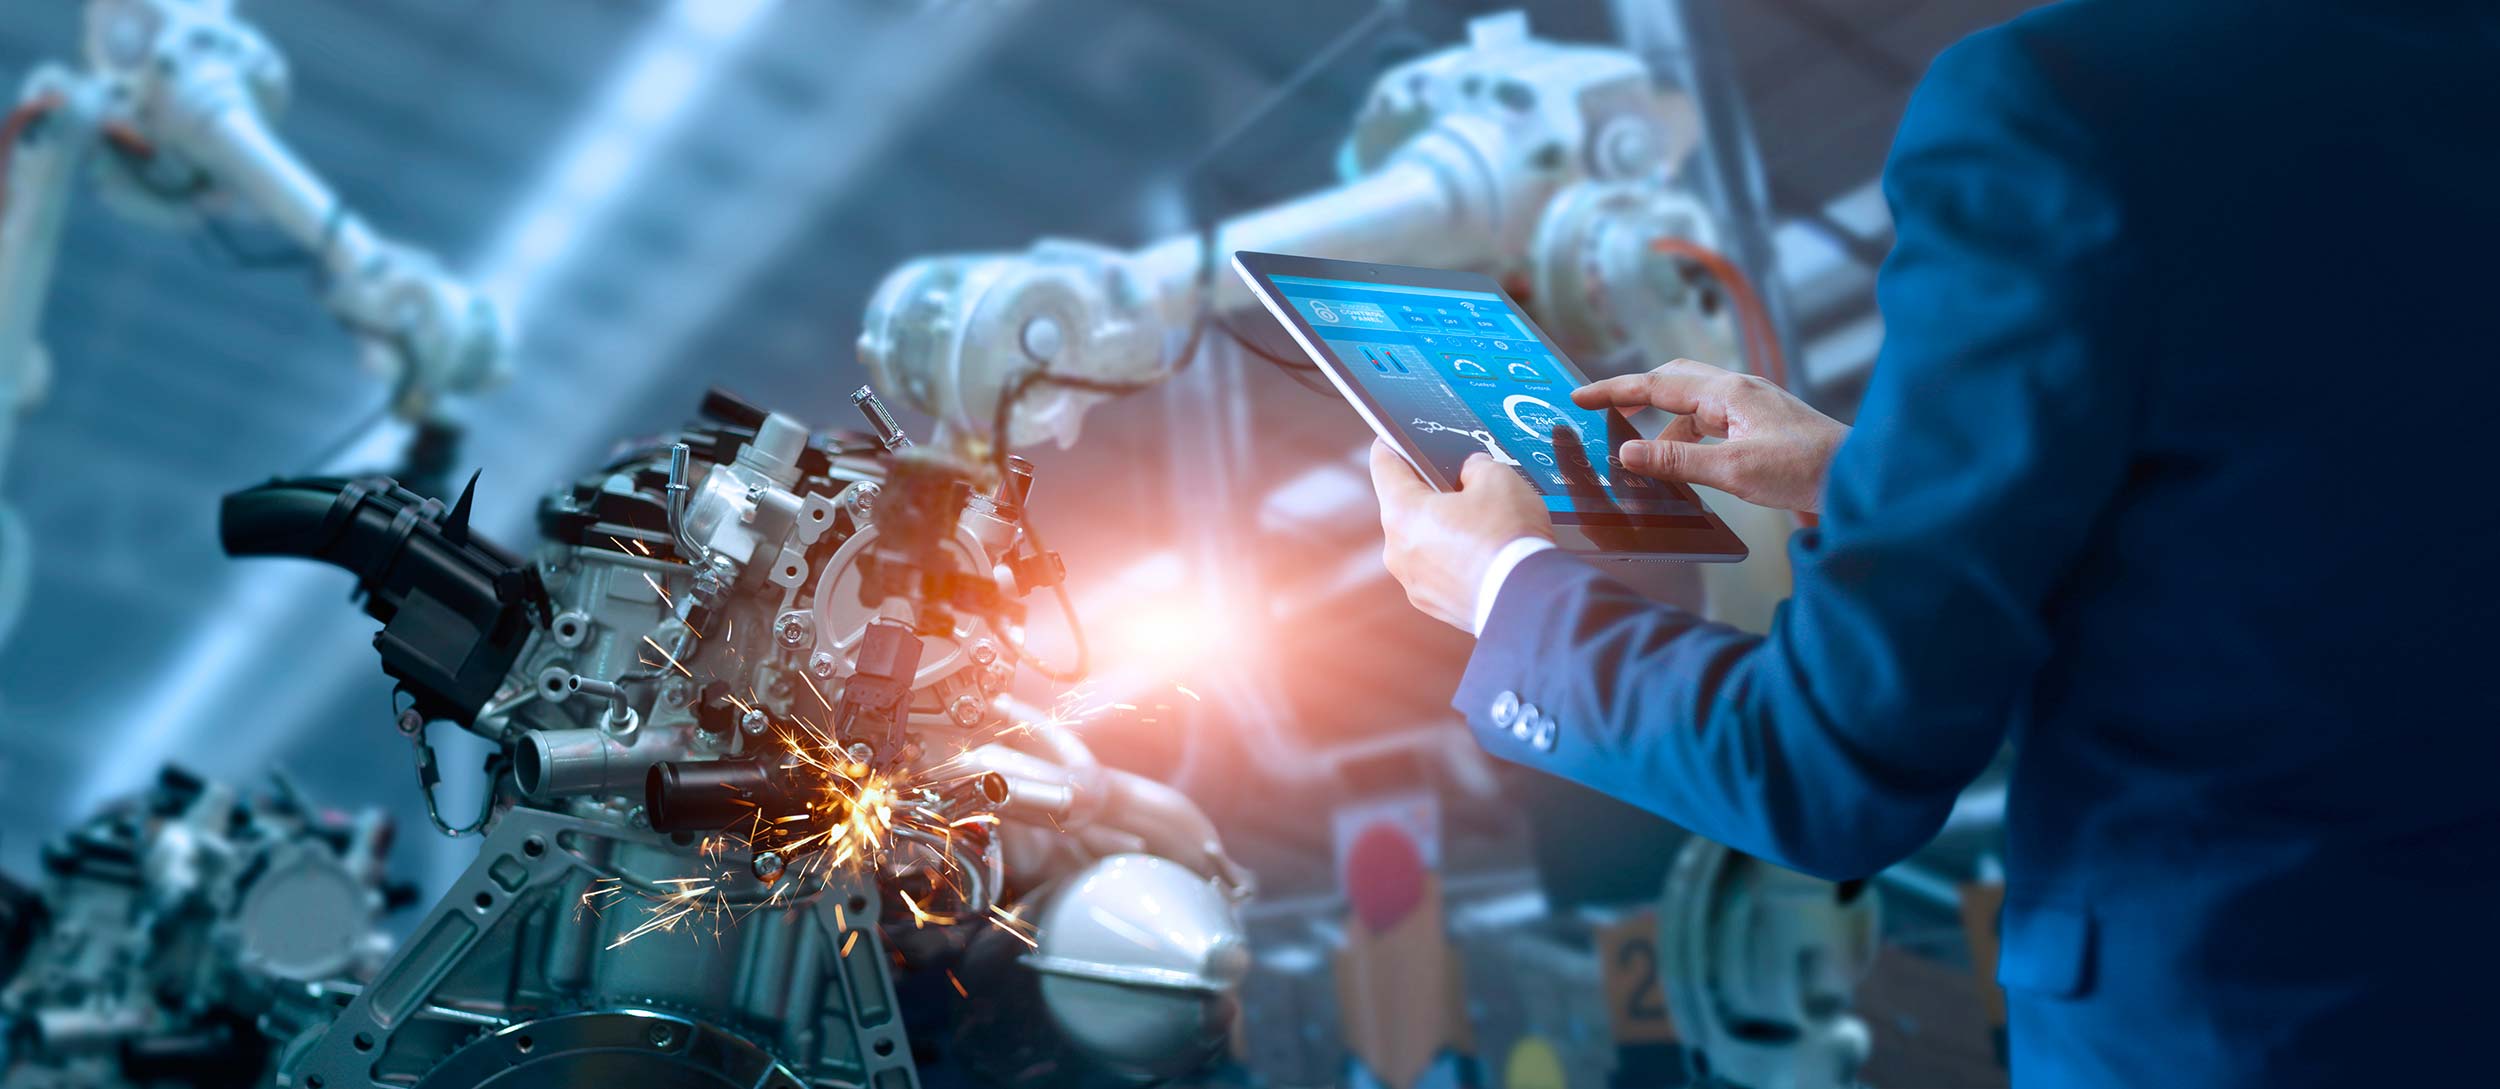 stock-photo-manager-engineer-check-and-control-automation-robot-arms-machine-in-intelligent-factory-industrial-1119927341